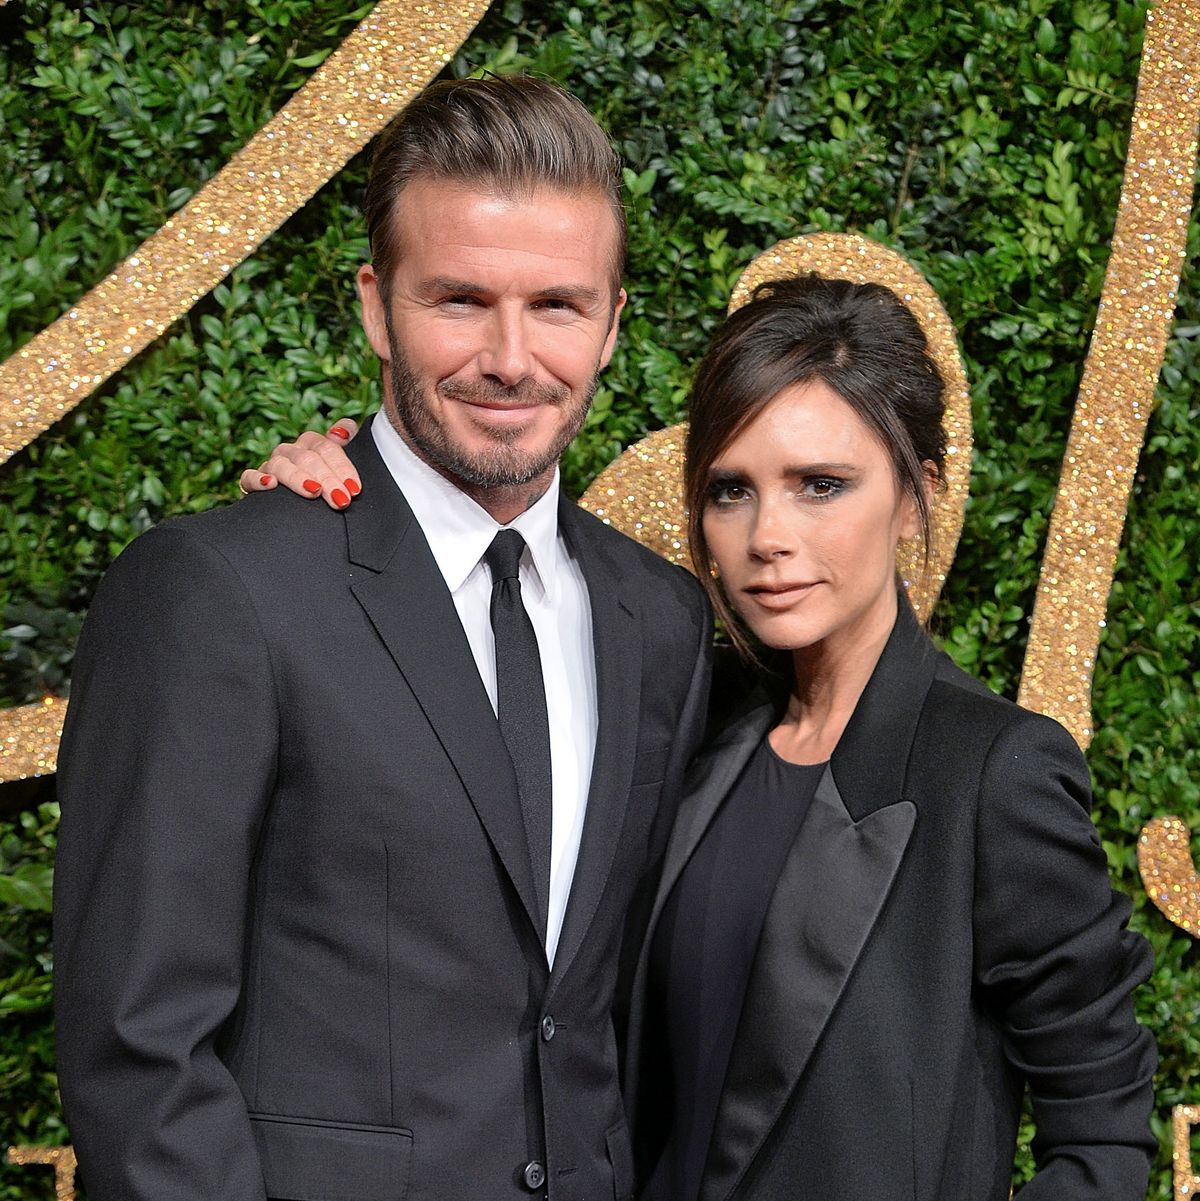 Victoria Beckham quells divorce rumors: 'I am trying to be the